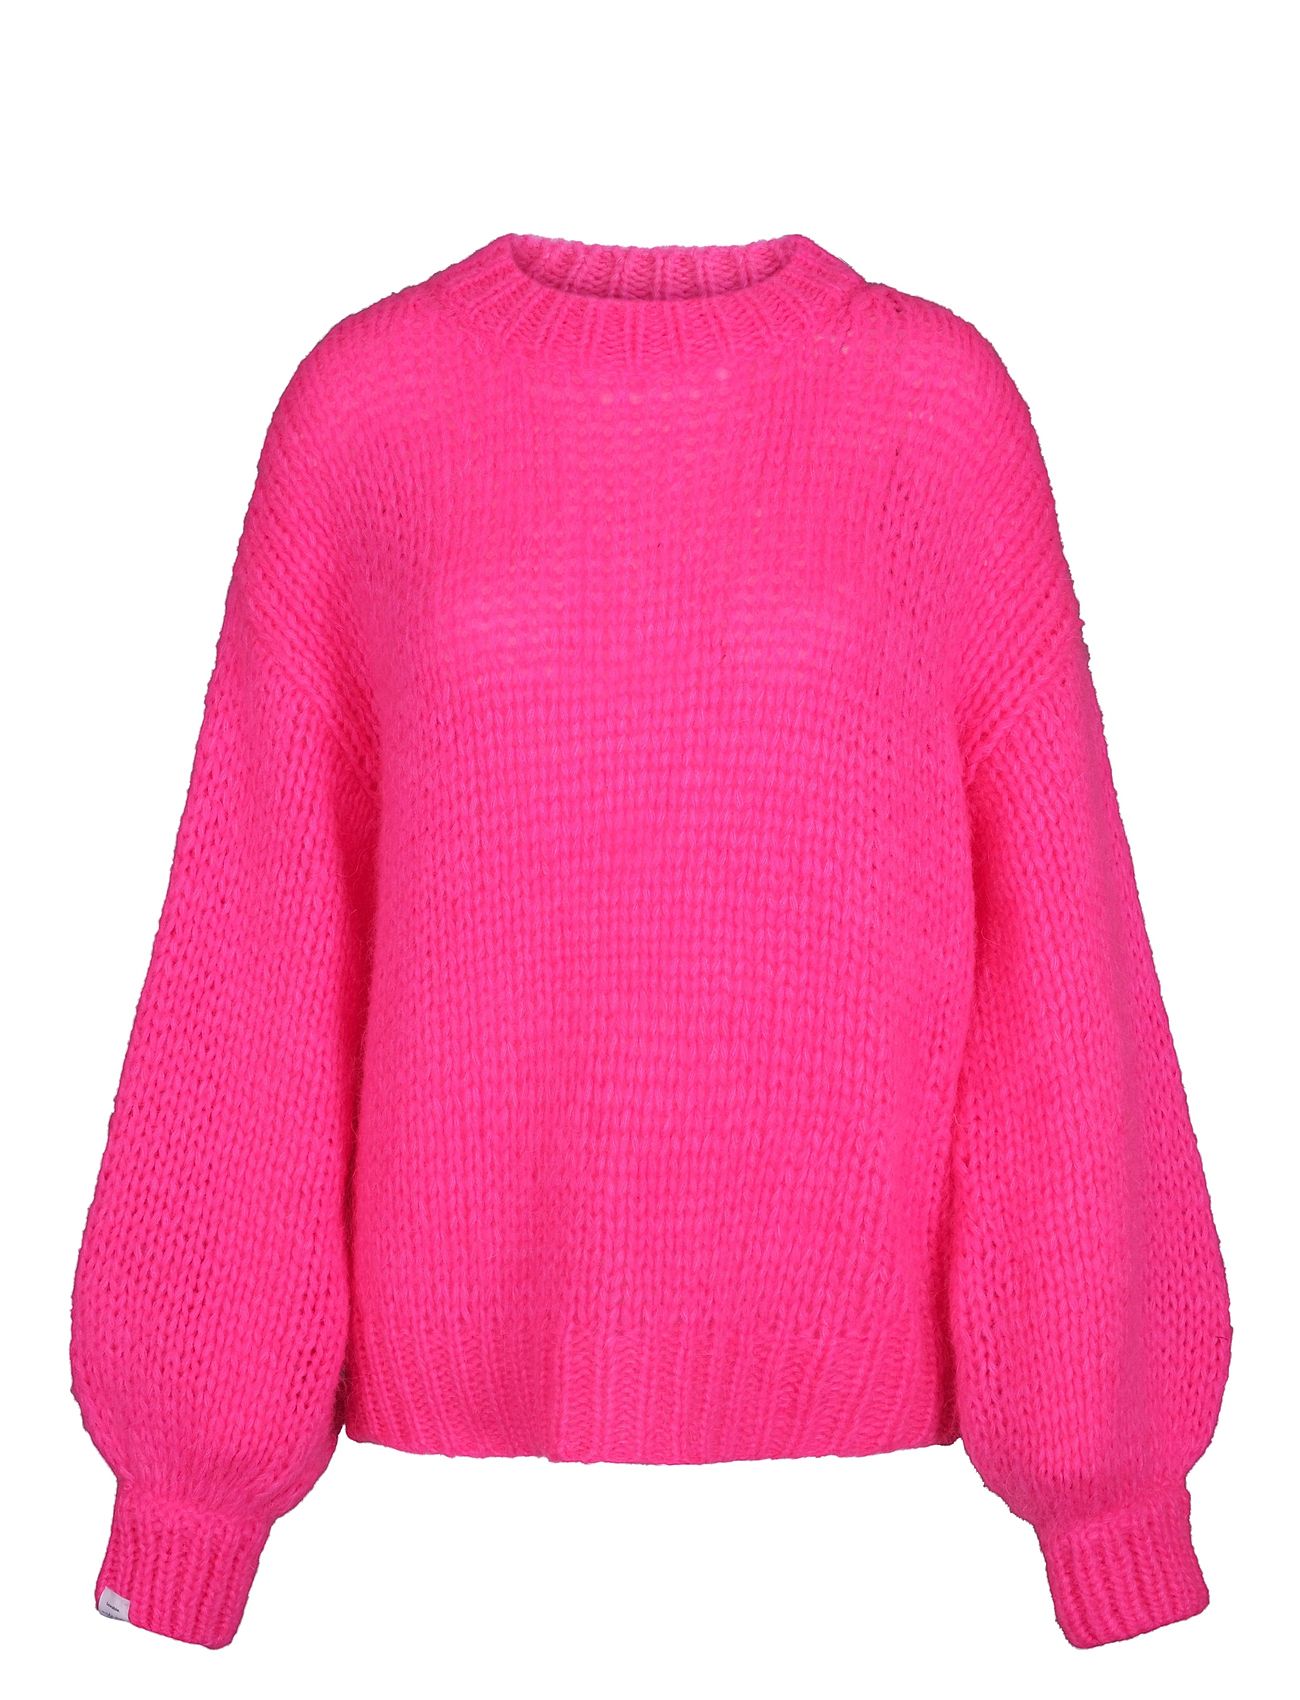 Florie Rn Sweater Tops Knitwear Jumpers Pink Once Untold